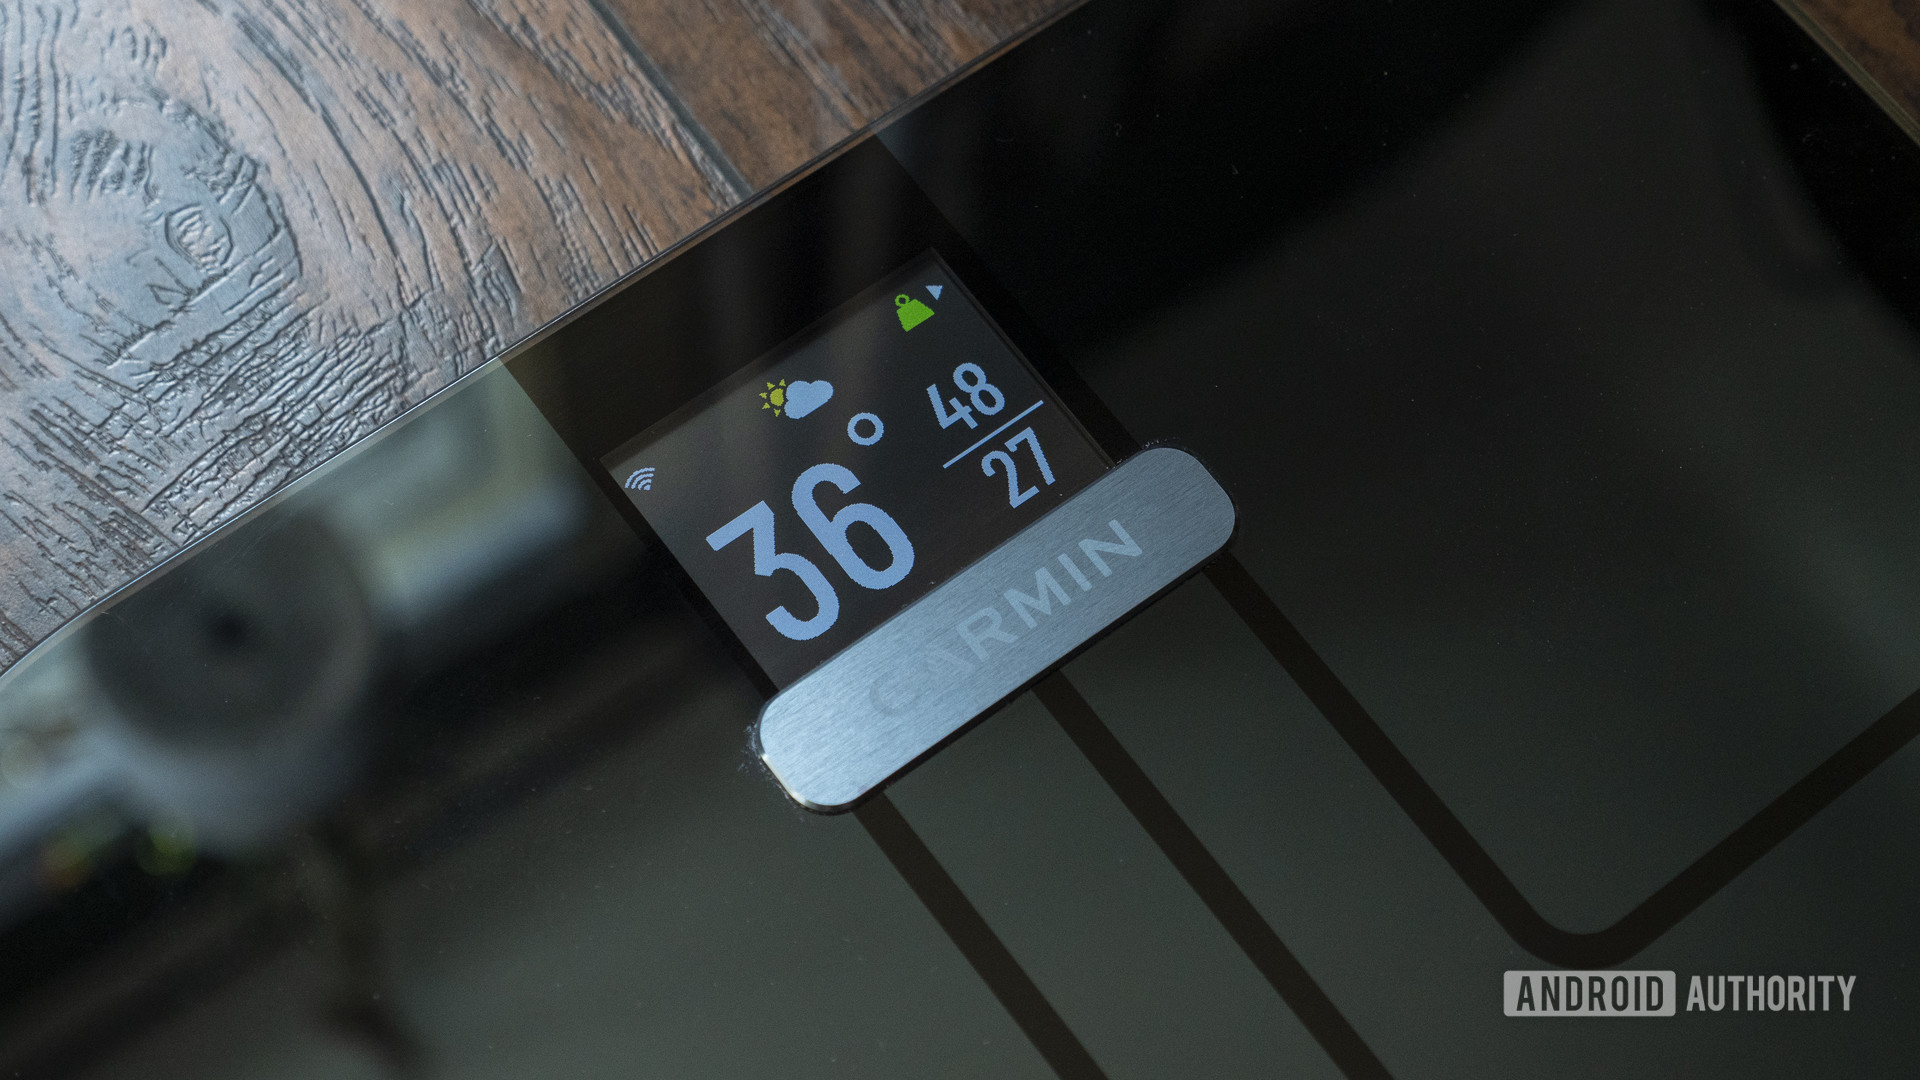 Garmin Index S2 smart scale review - Android Authority